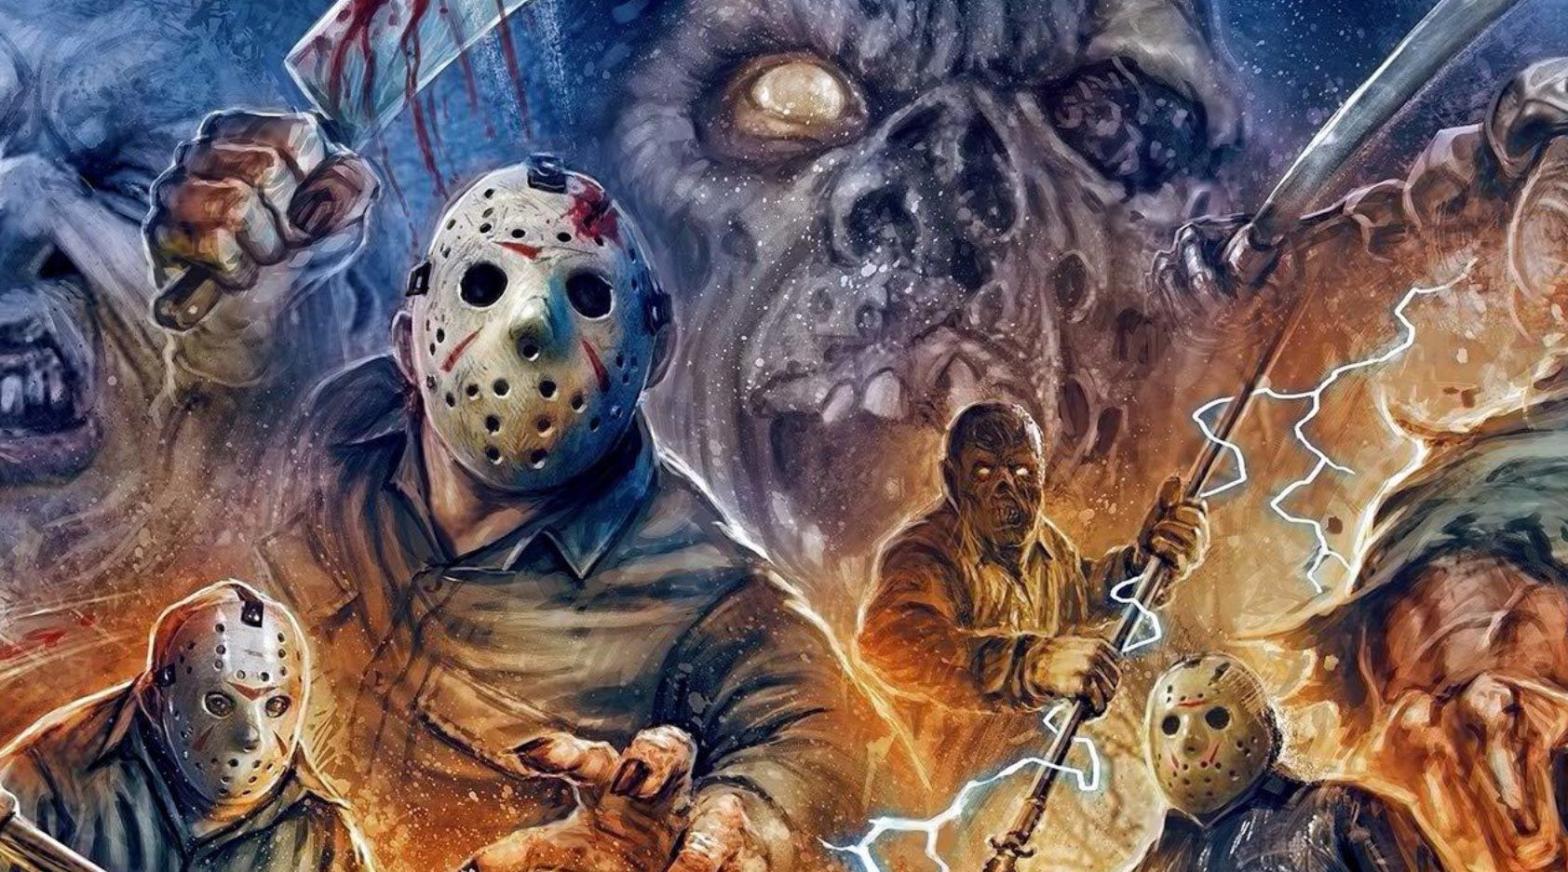 A crop of the art from a new Friday the 13th box set. (Image: Devon Whitehead for Shout Factory)